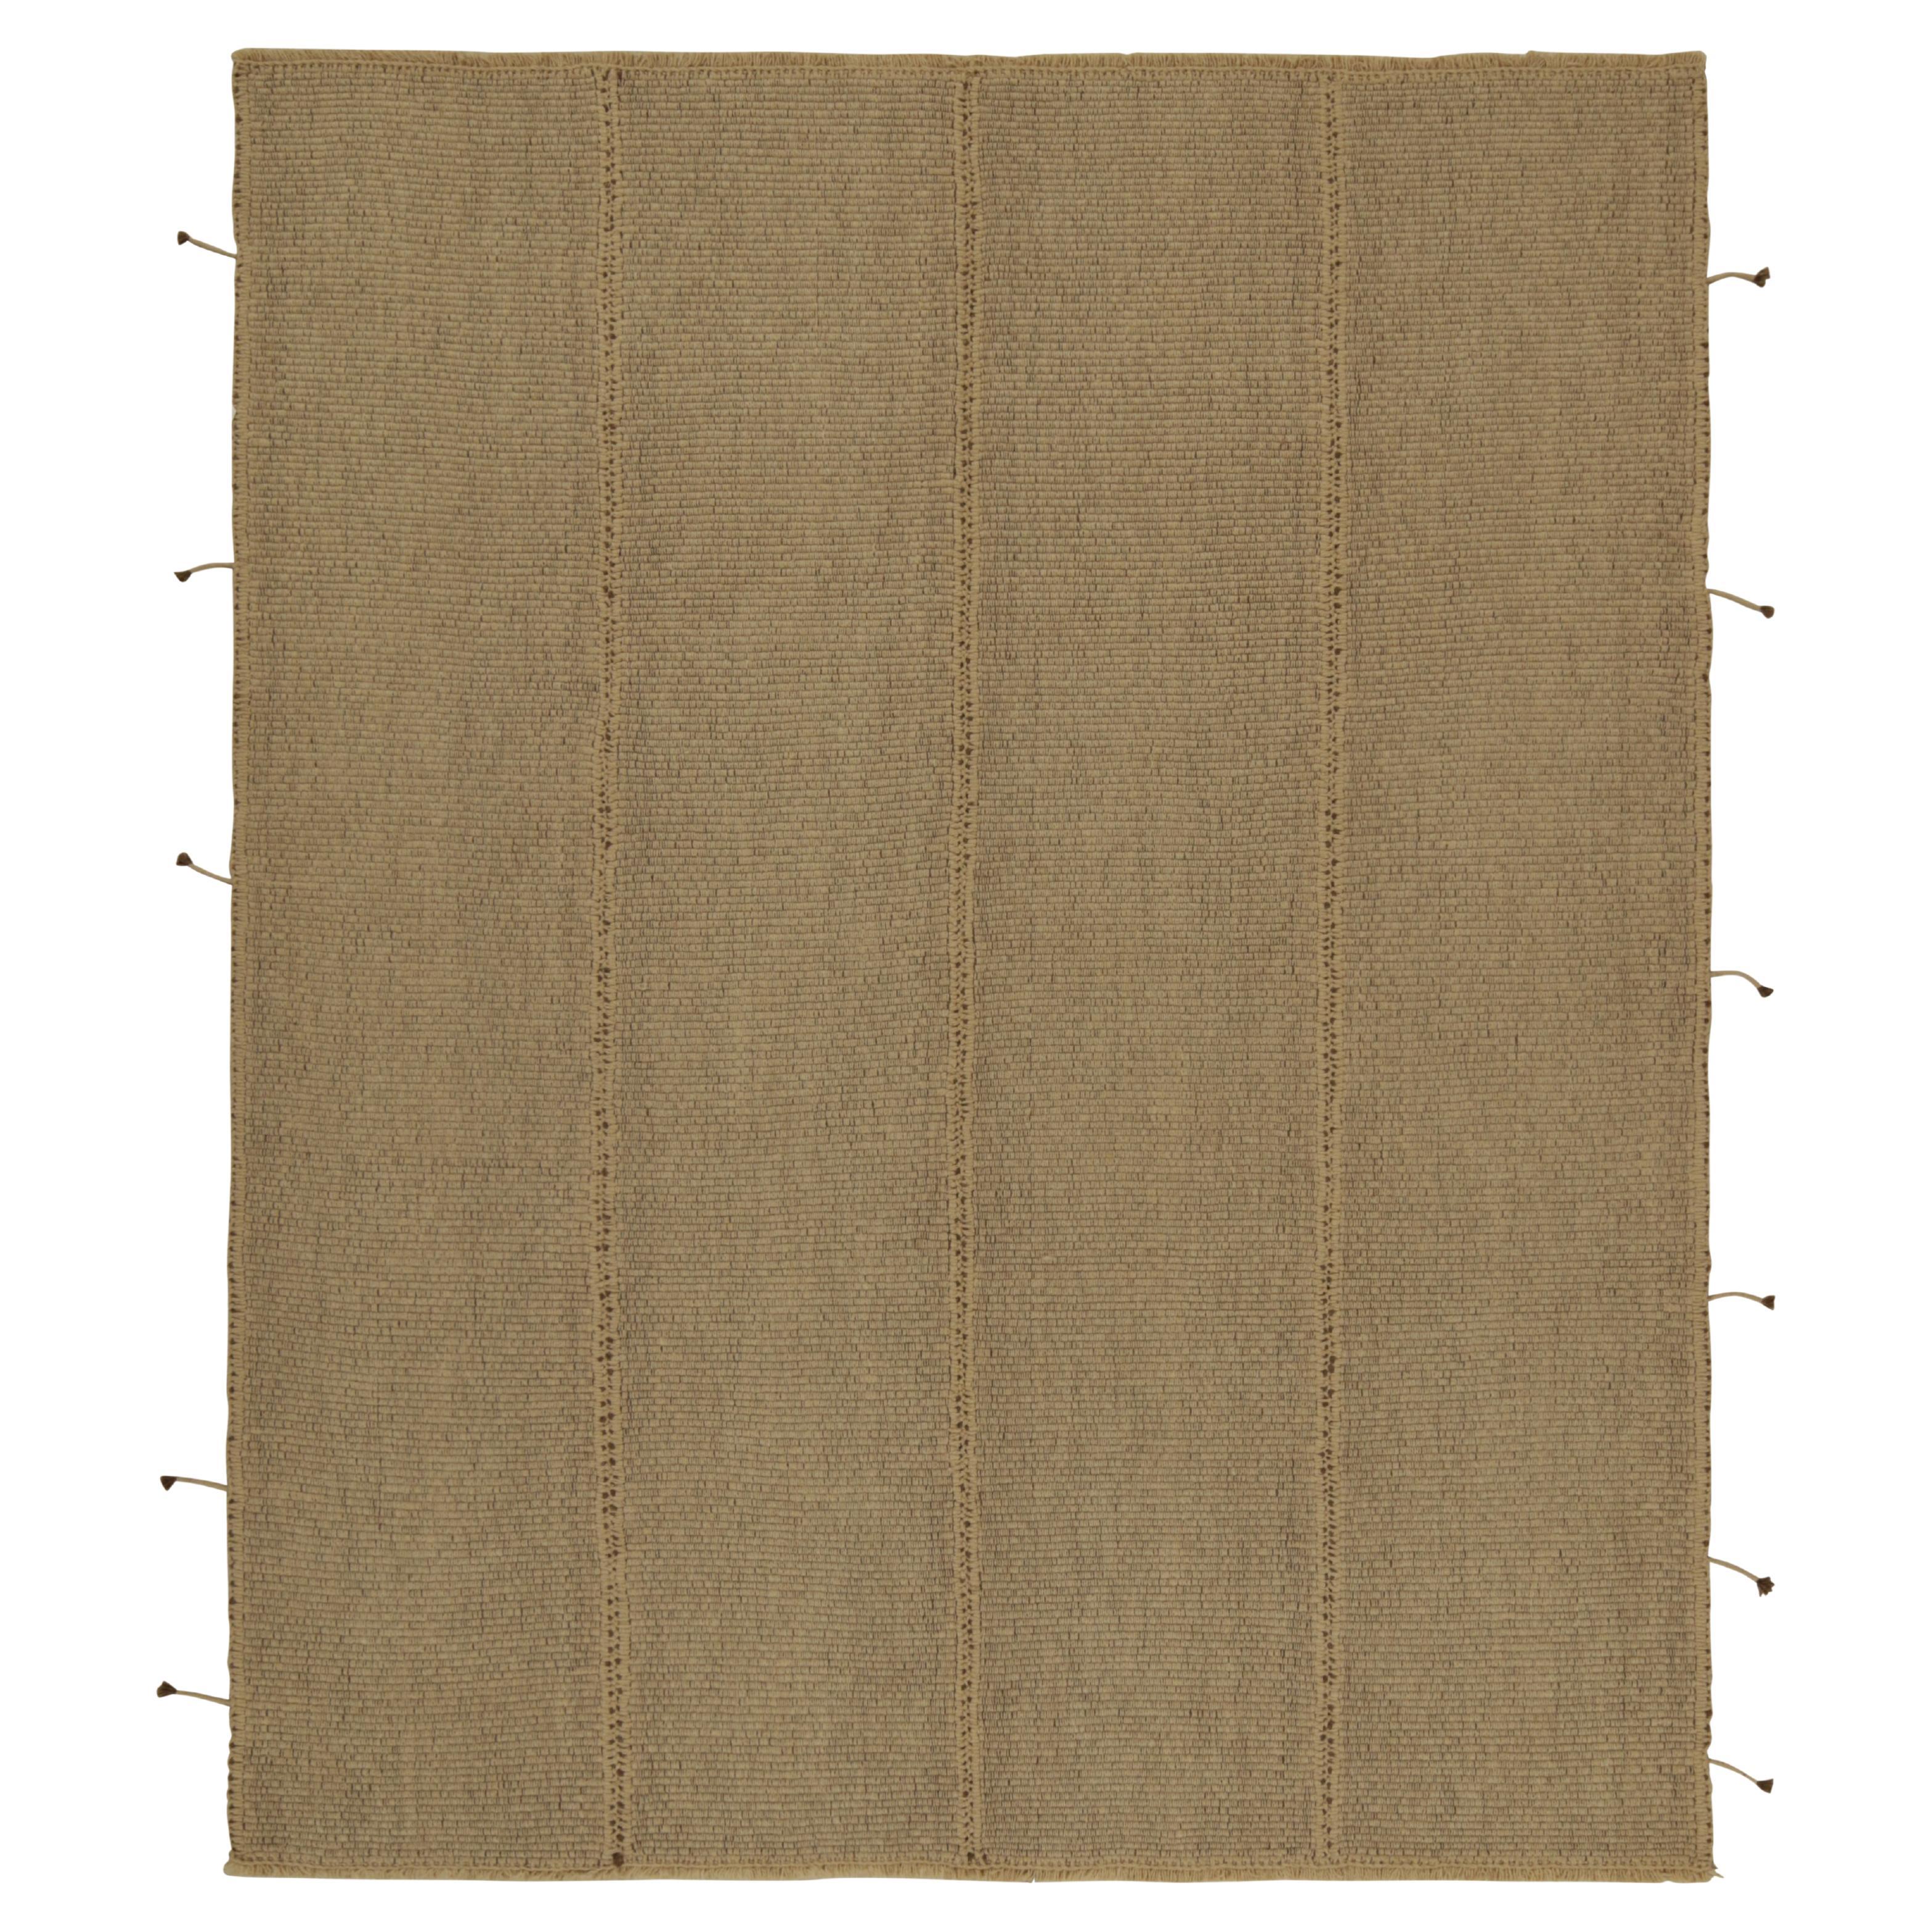 Rug & Kilim’s Contemporary Kilim in Beige-Brown with Muted Stripes